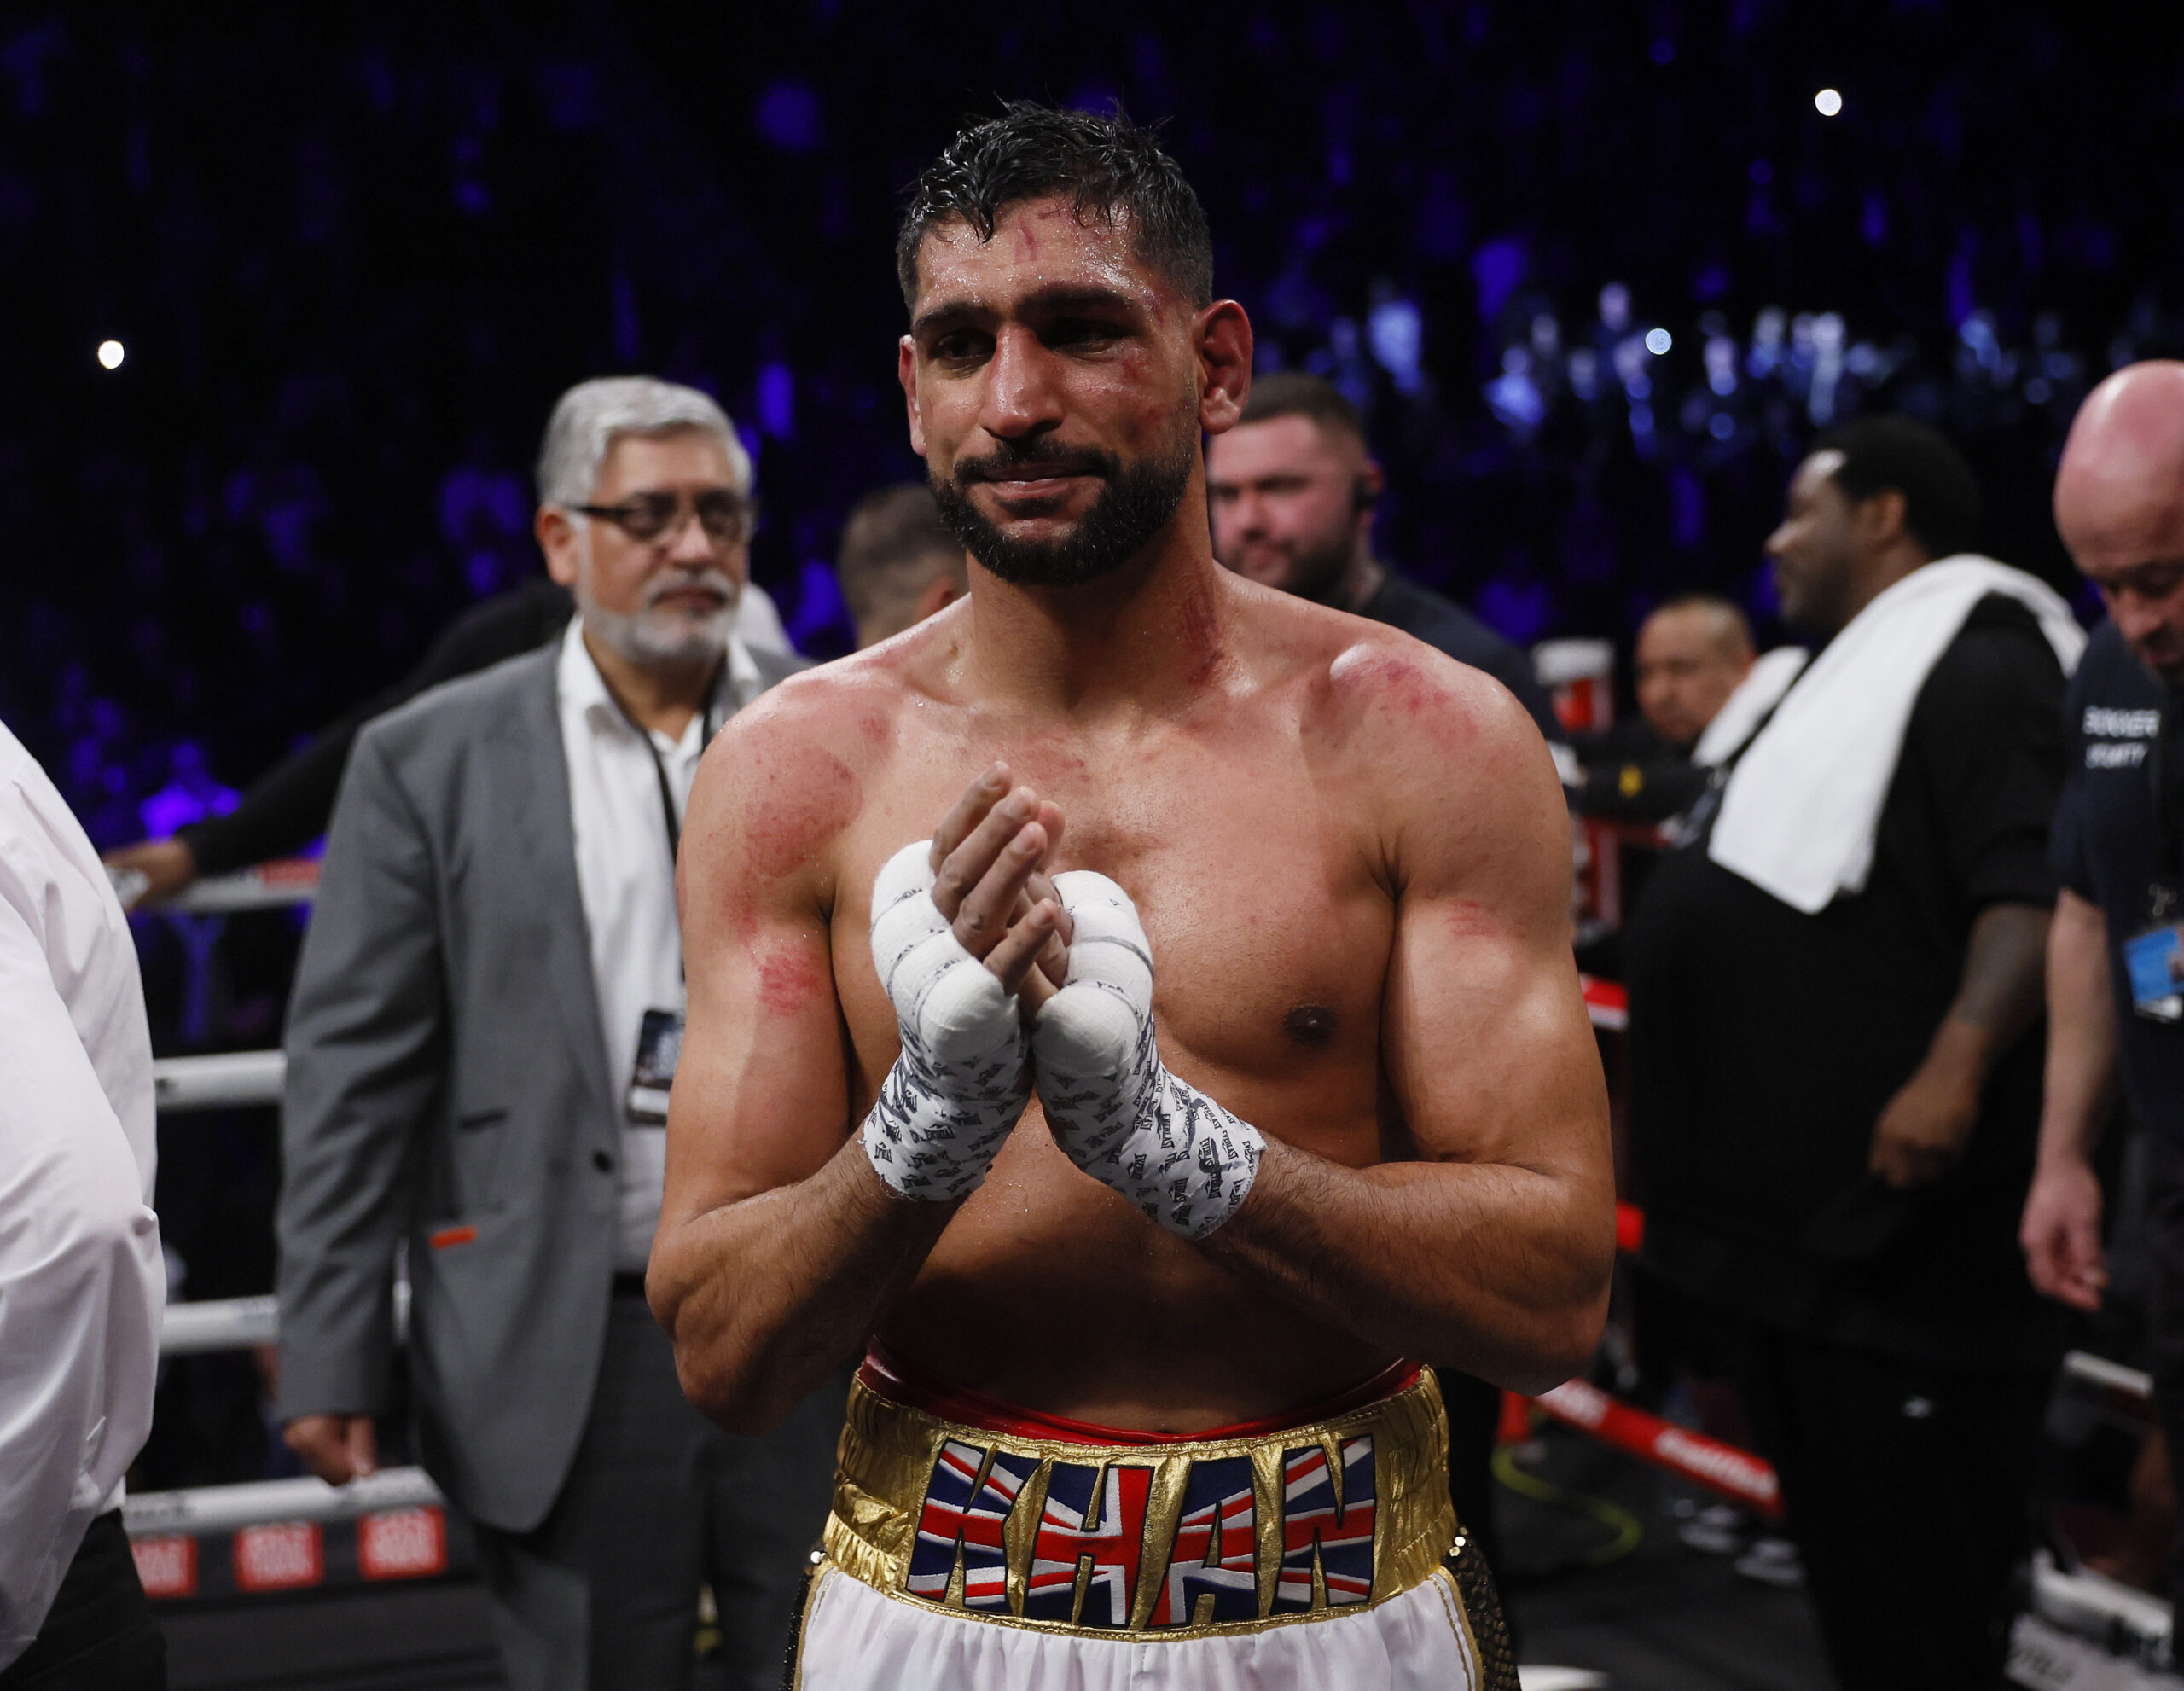 Boxer Amir Khan handed two-year ban over failed drug test Inquirer Sports